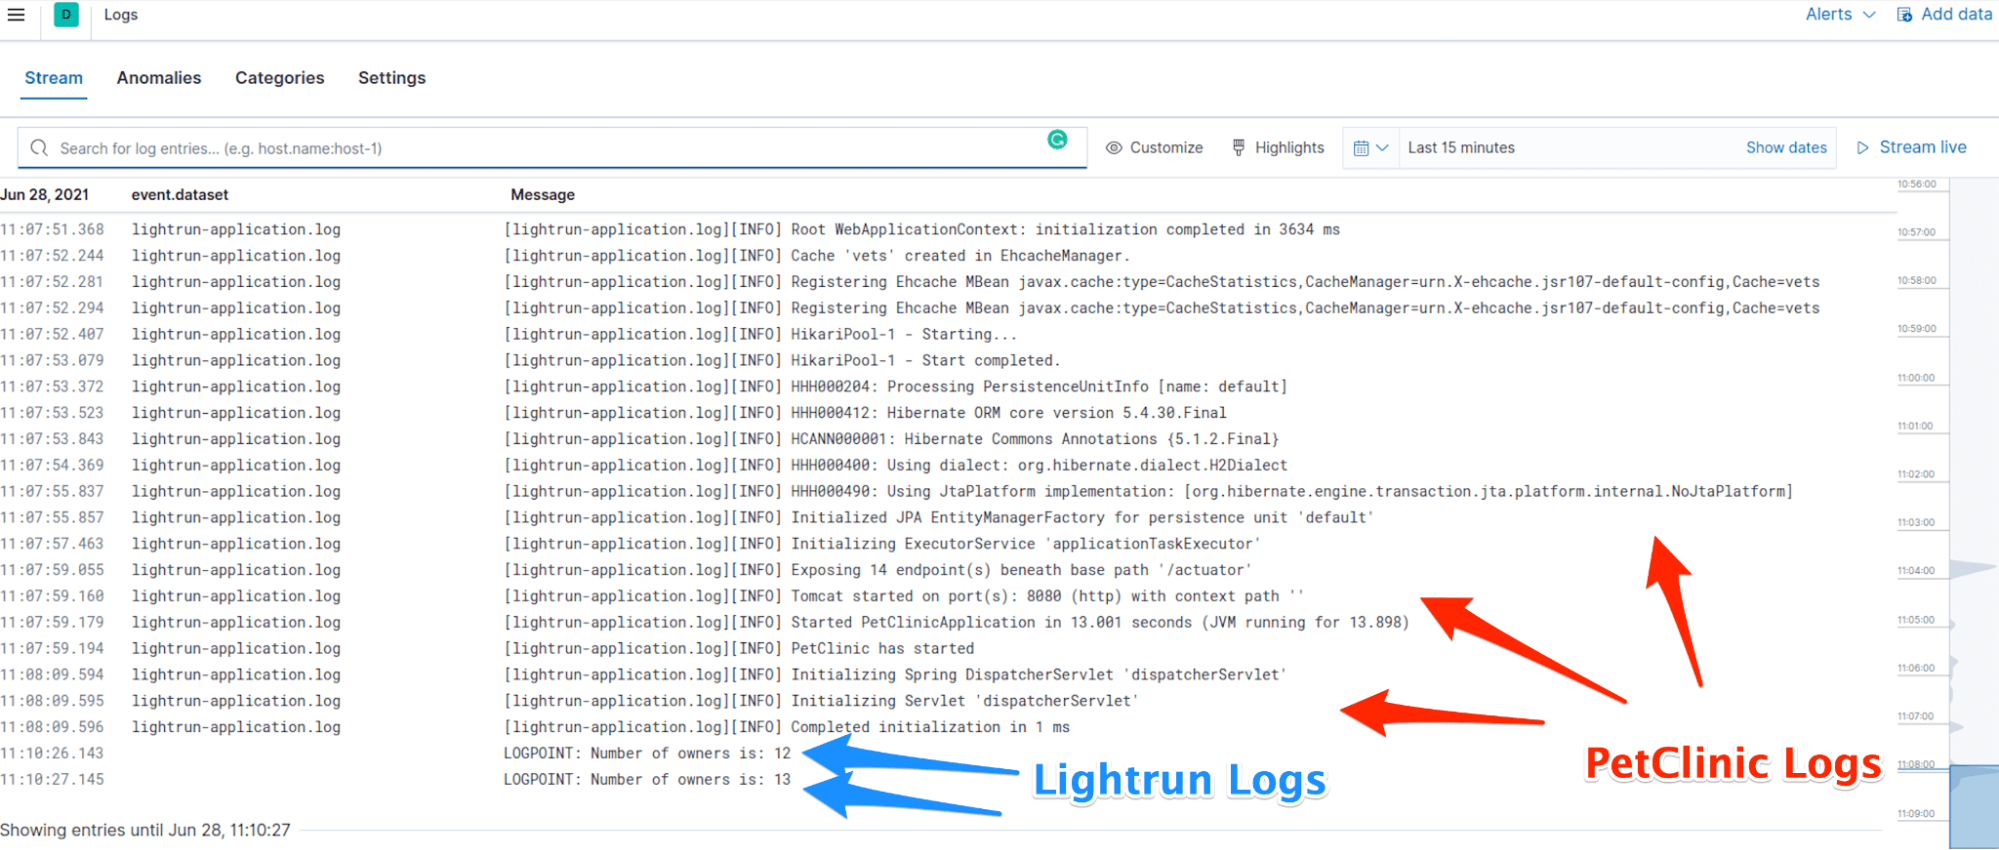 Lightrun Log will be sent to Elastic to be aggregated